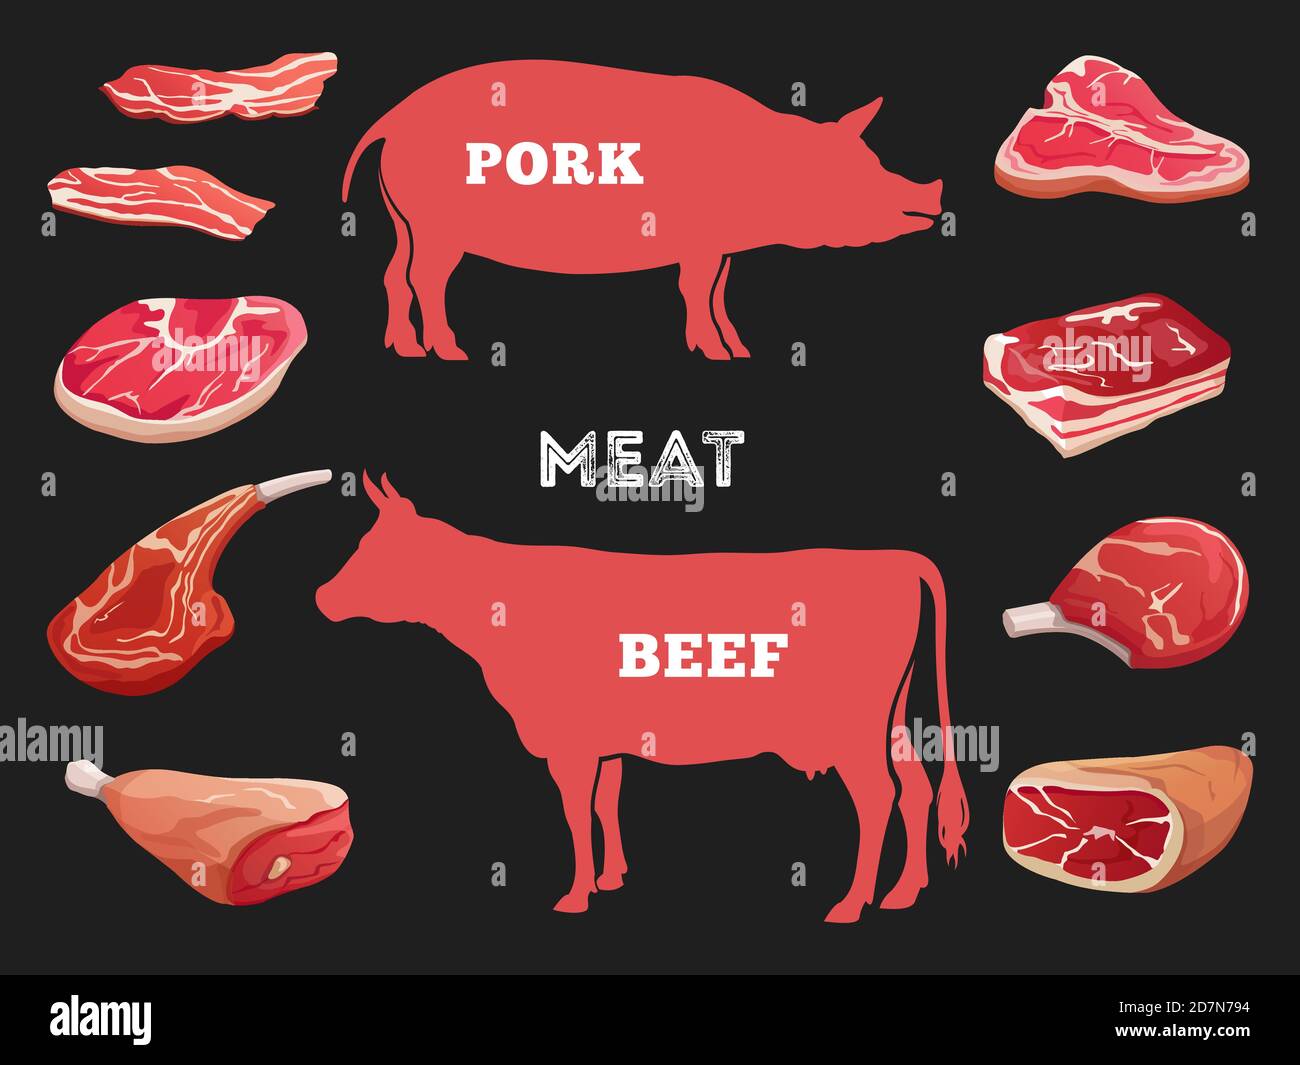 Different cuts of cow and pork meat vector illustration. Meat pork, butchery beef Stock Vector